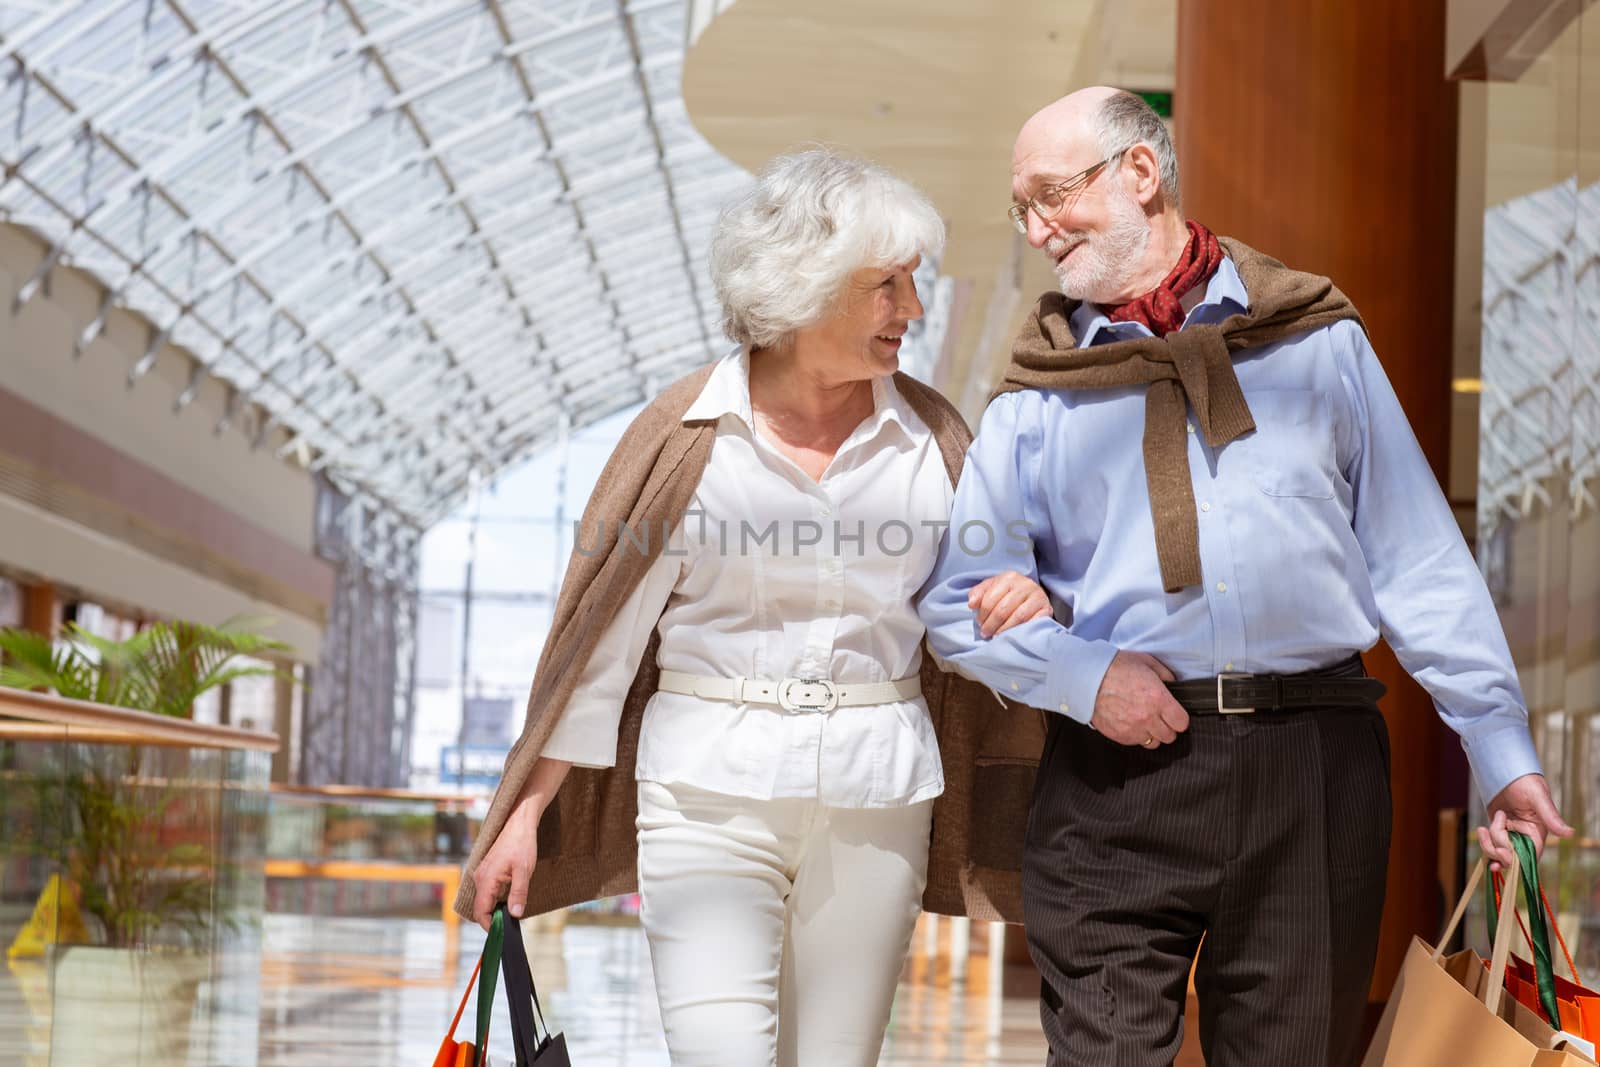 Adult senior couple with purchases in bags at shopping mall